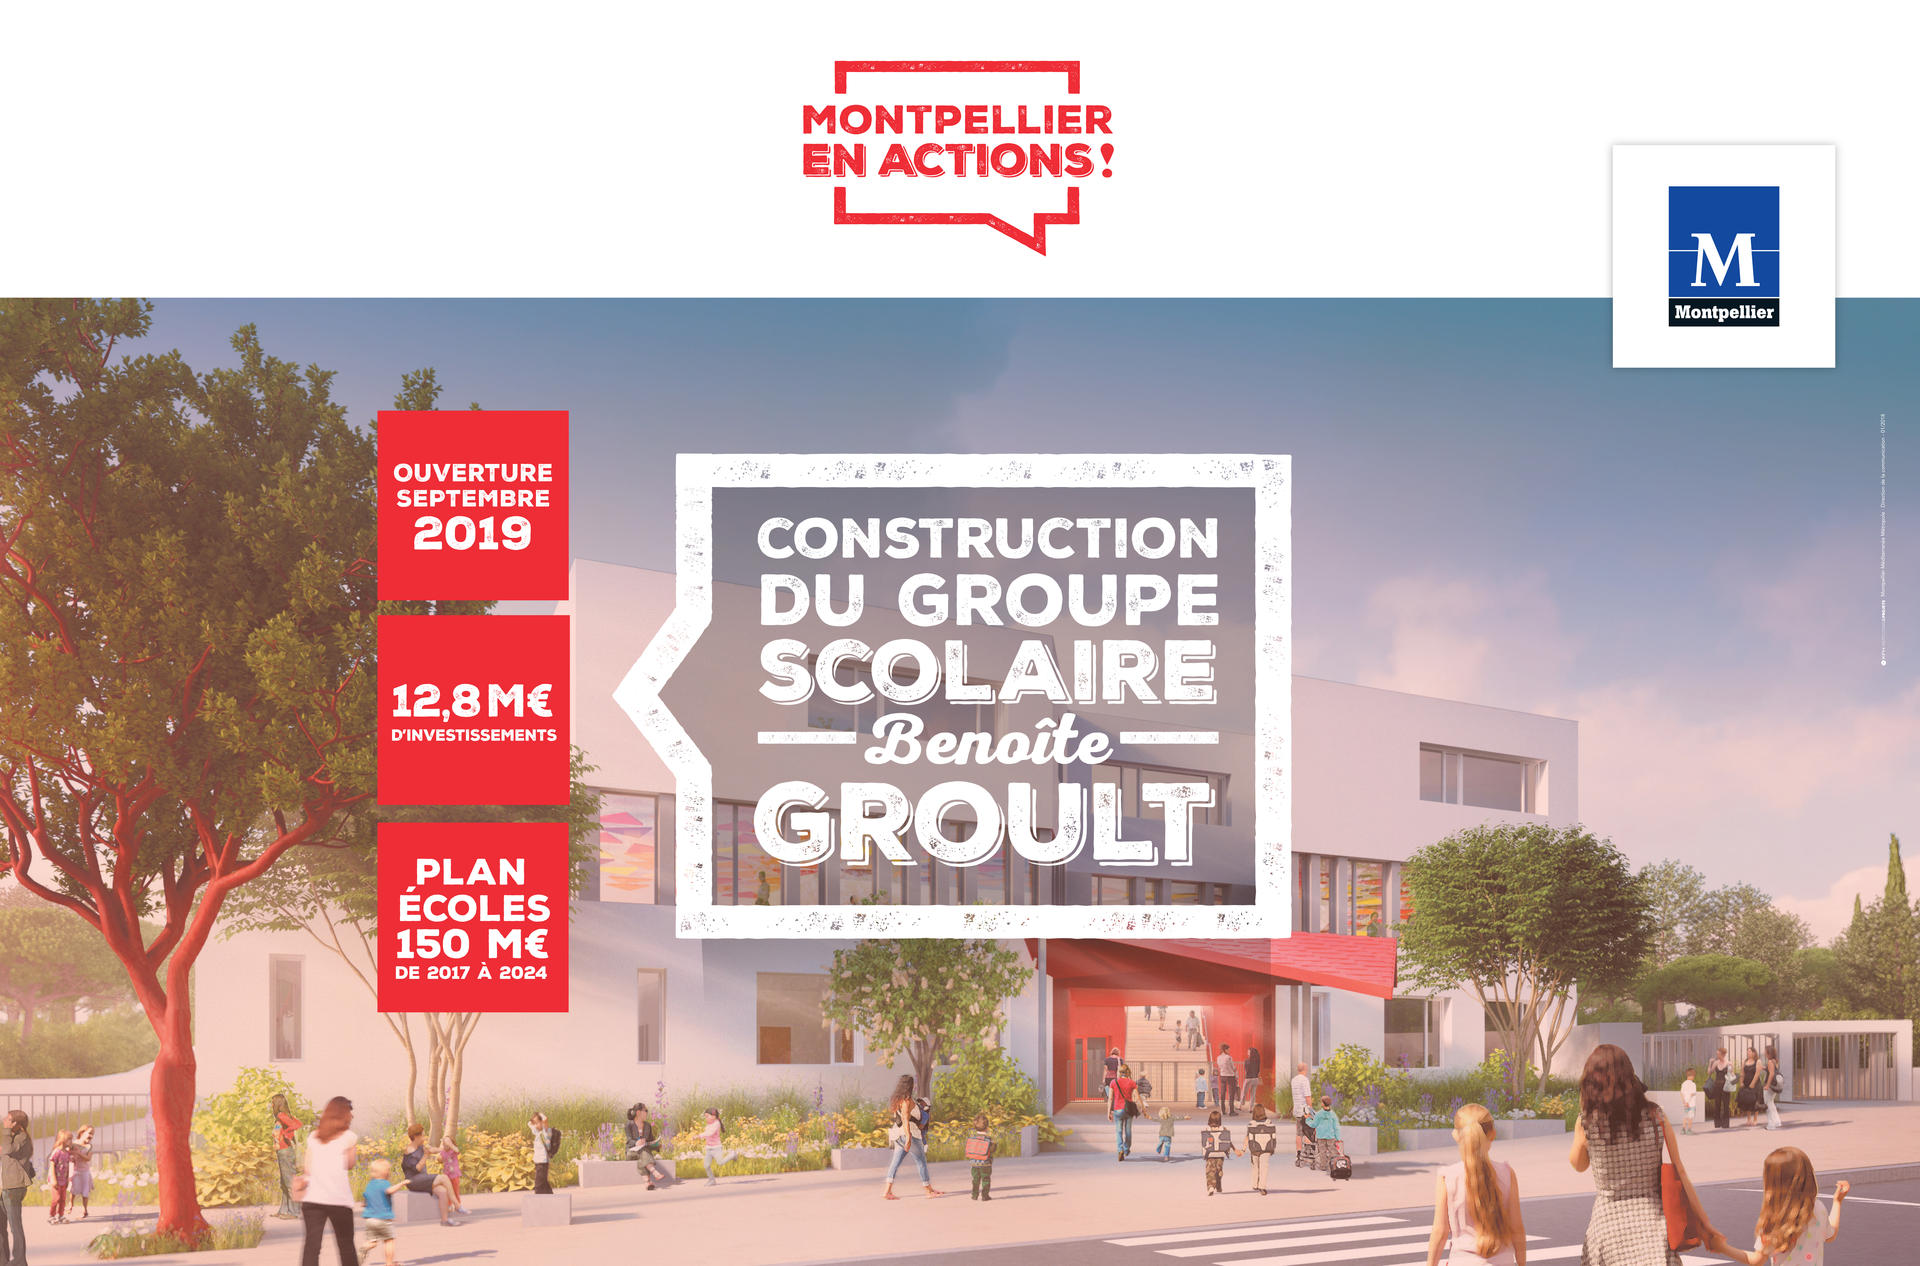 Groupe Scolaire Groult